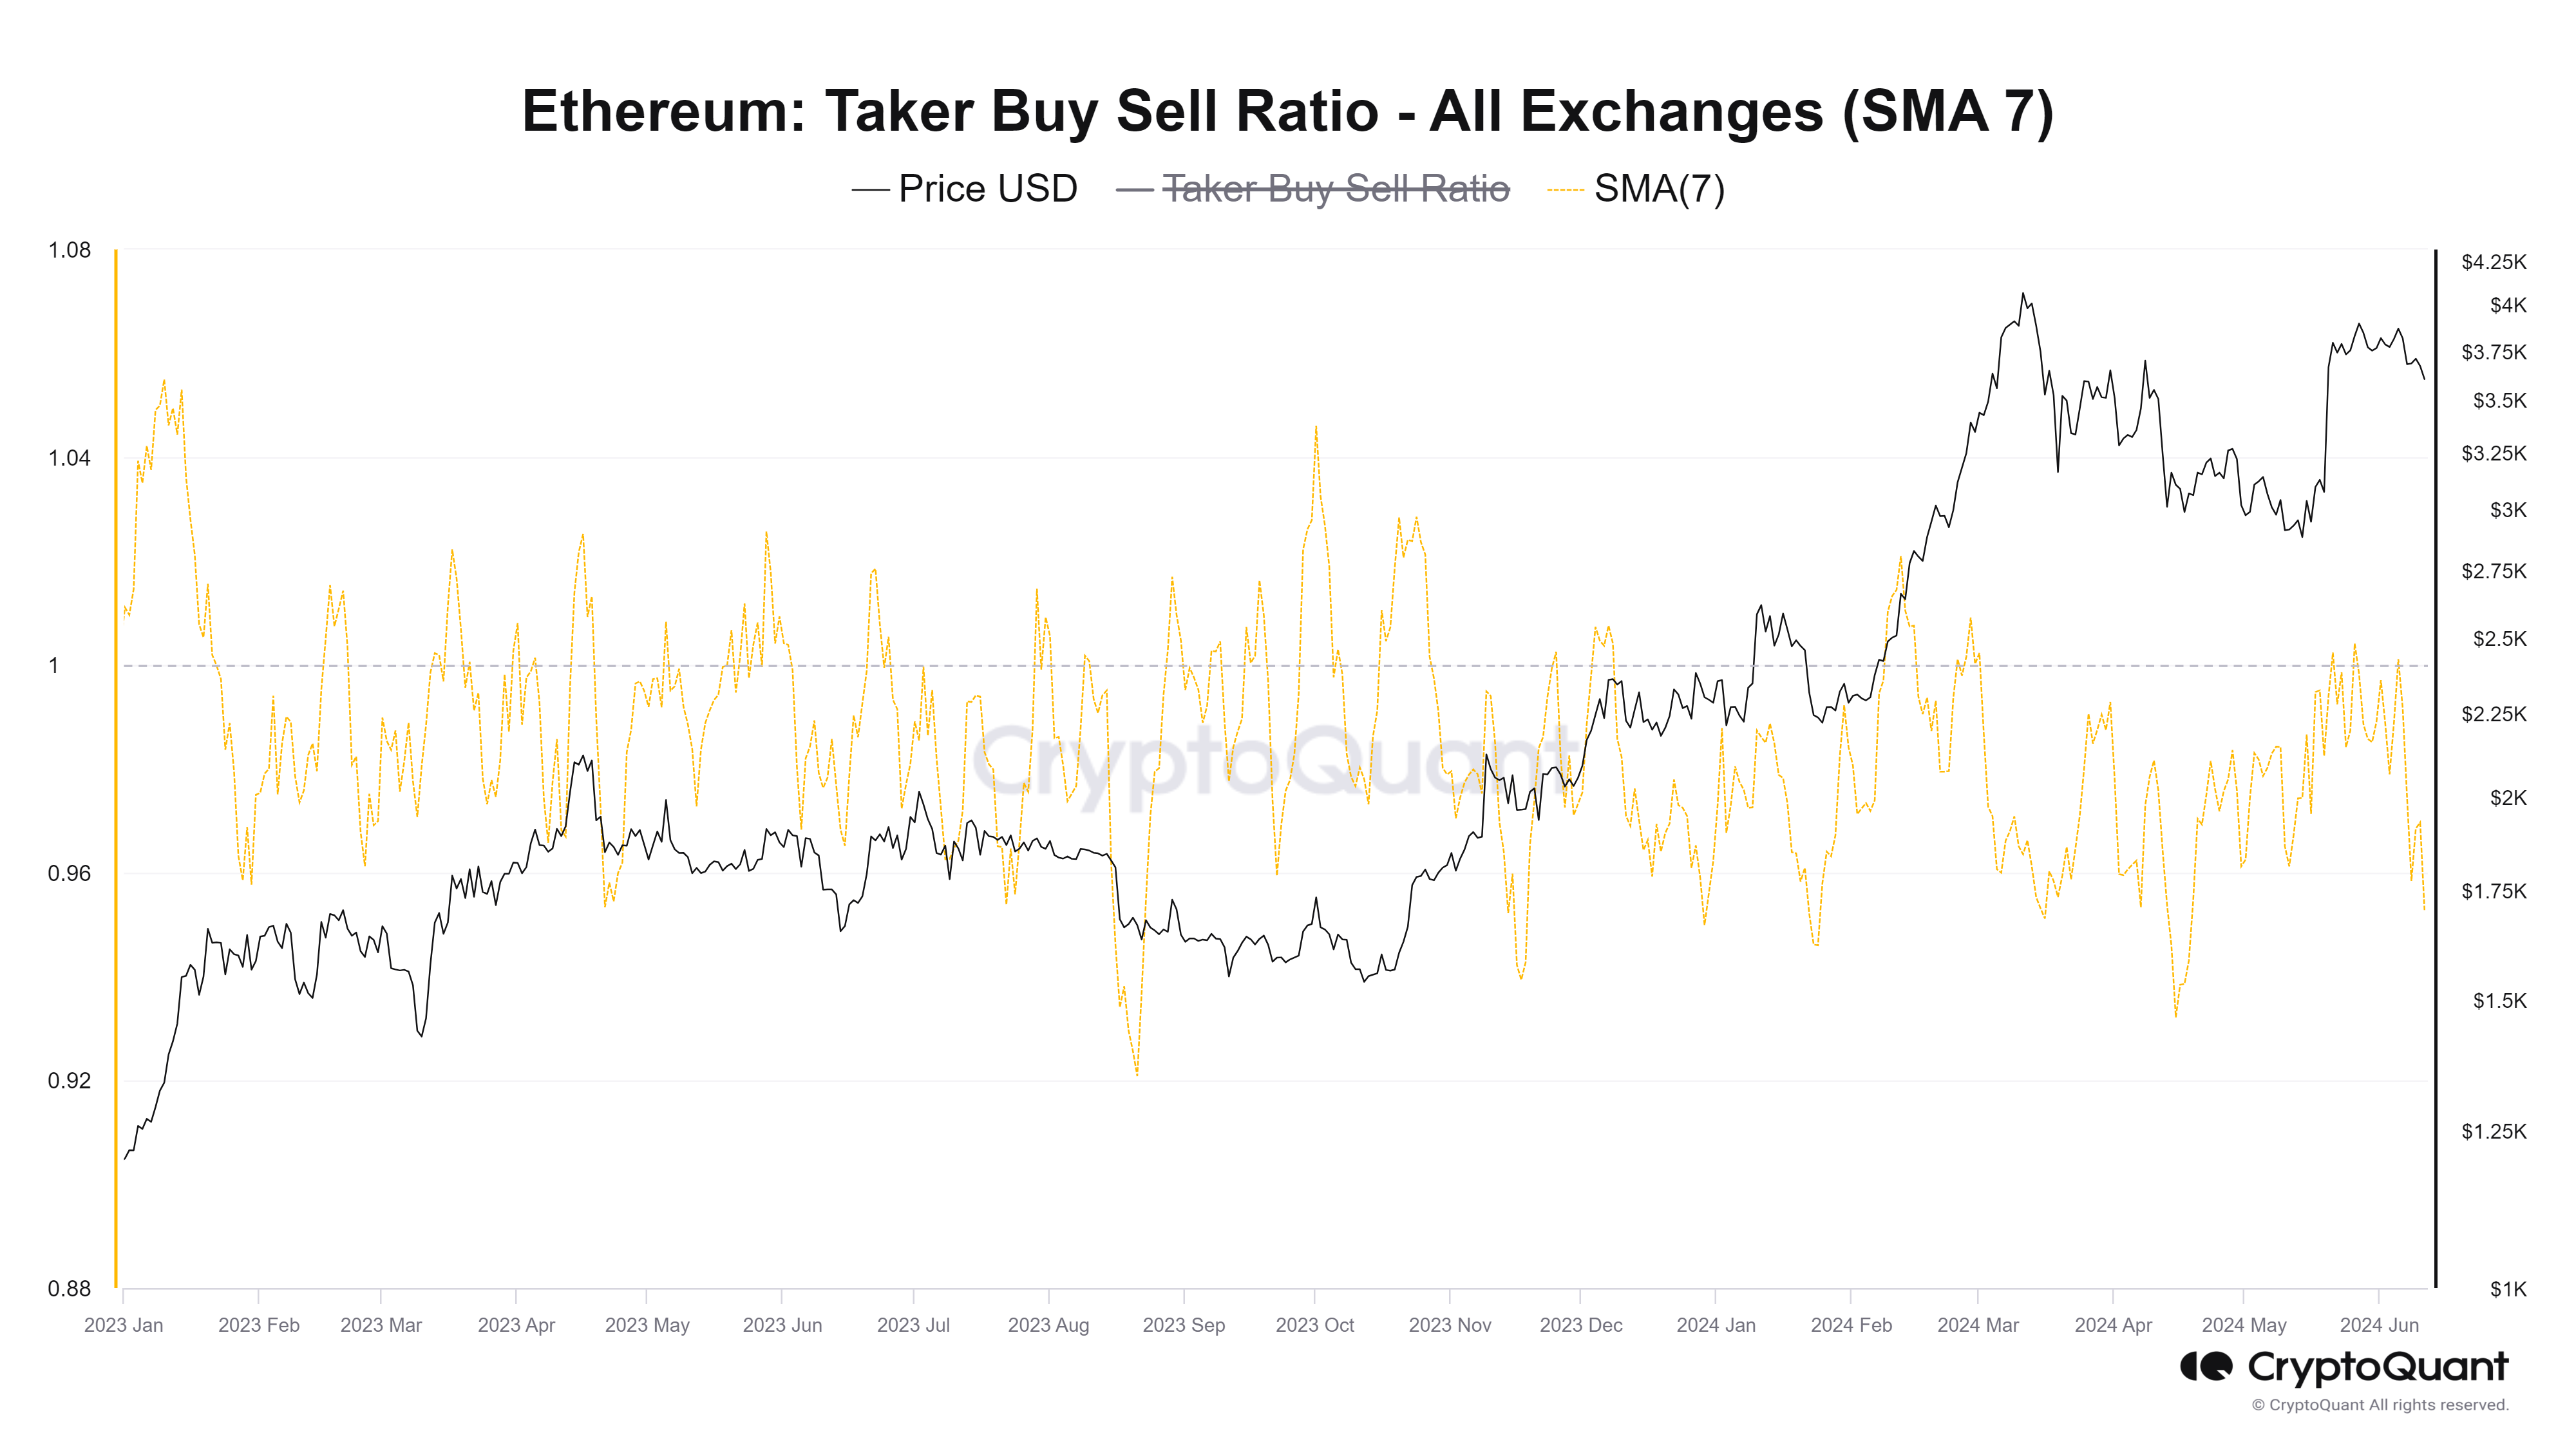 ETH Taker Buy Sell Ratio chart